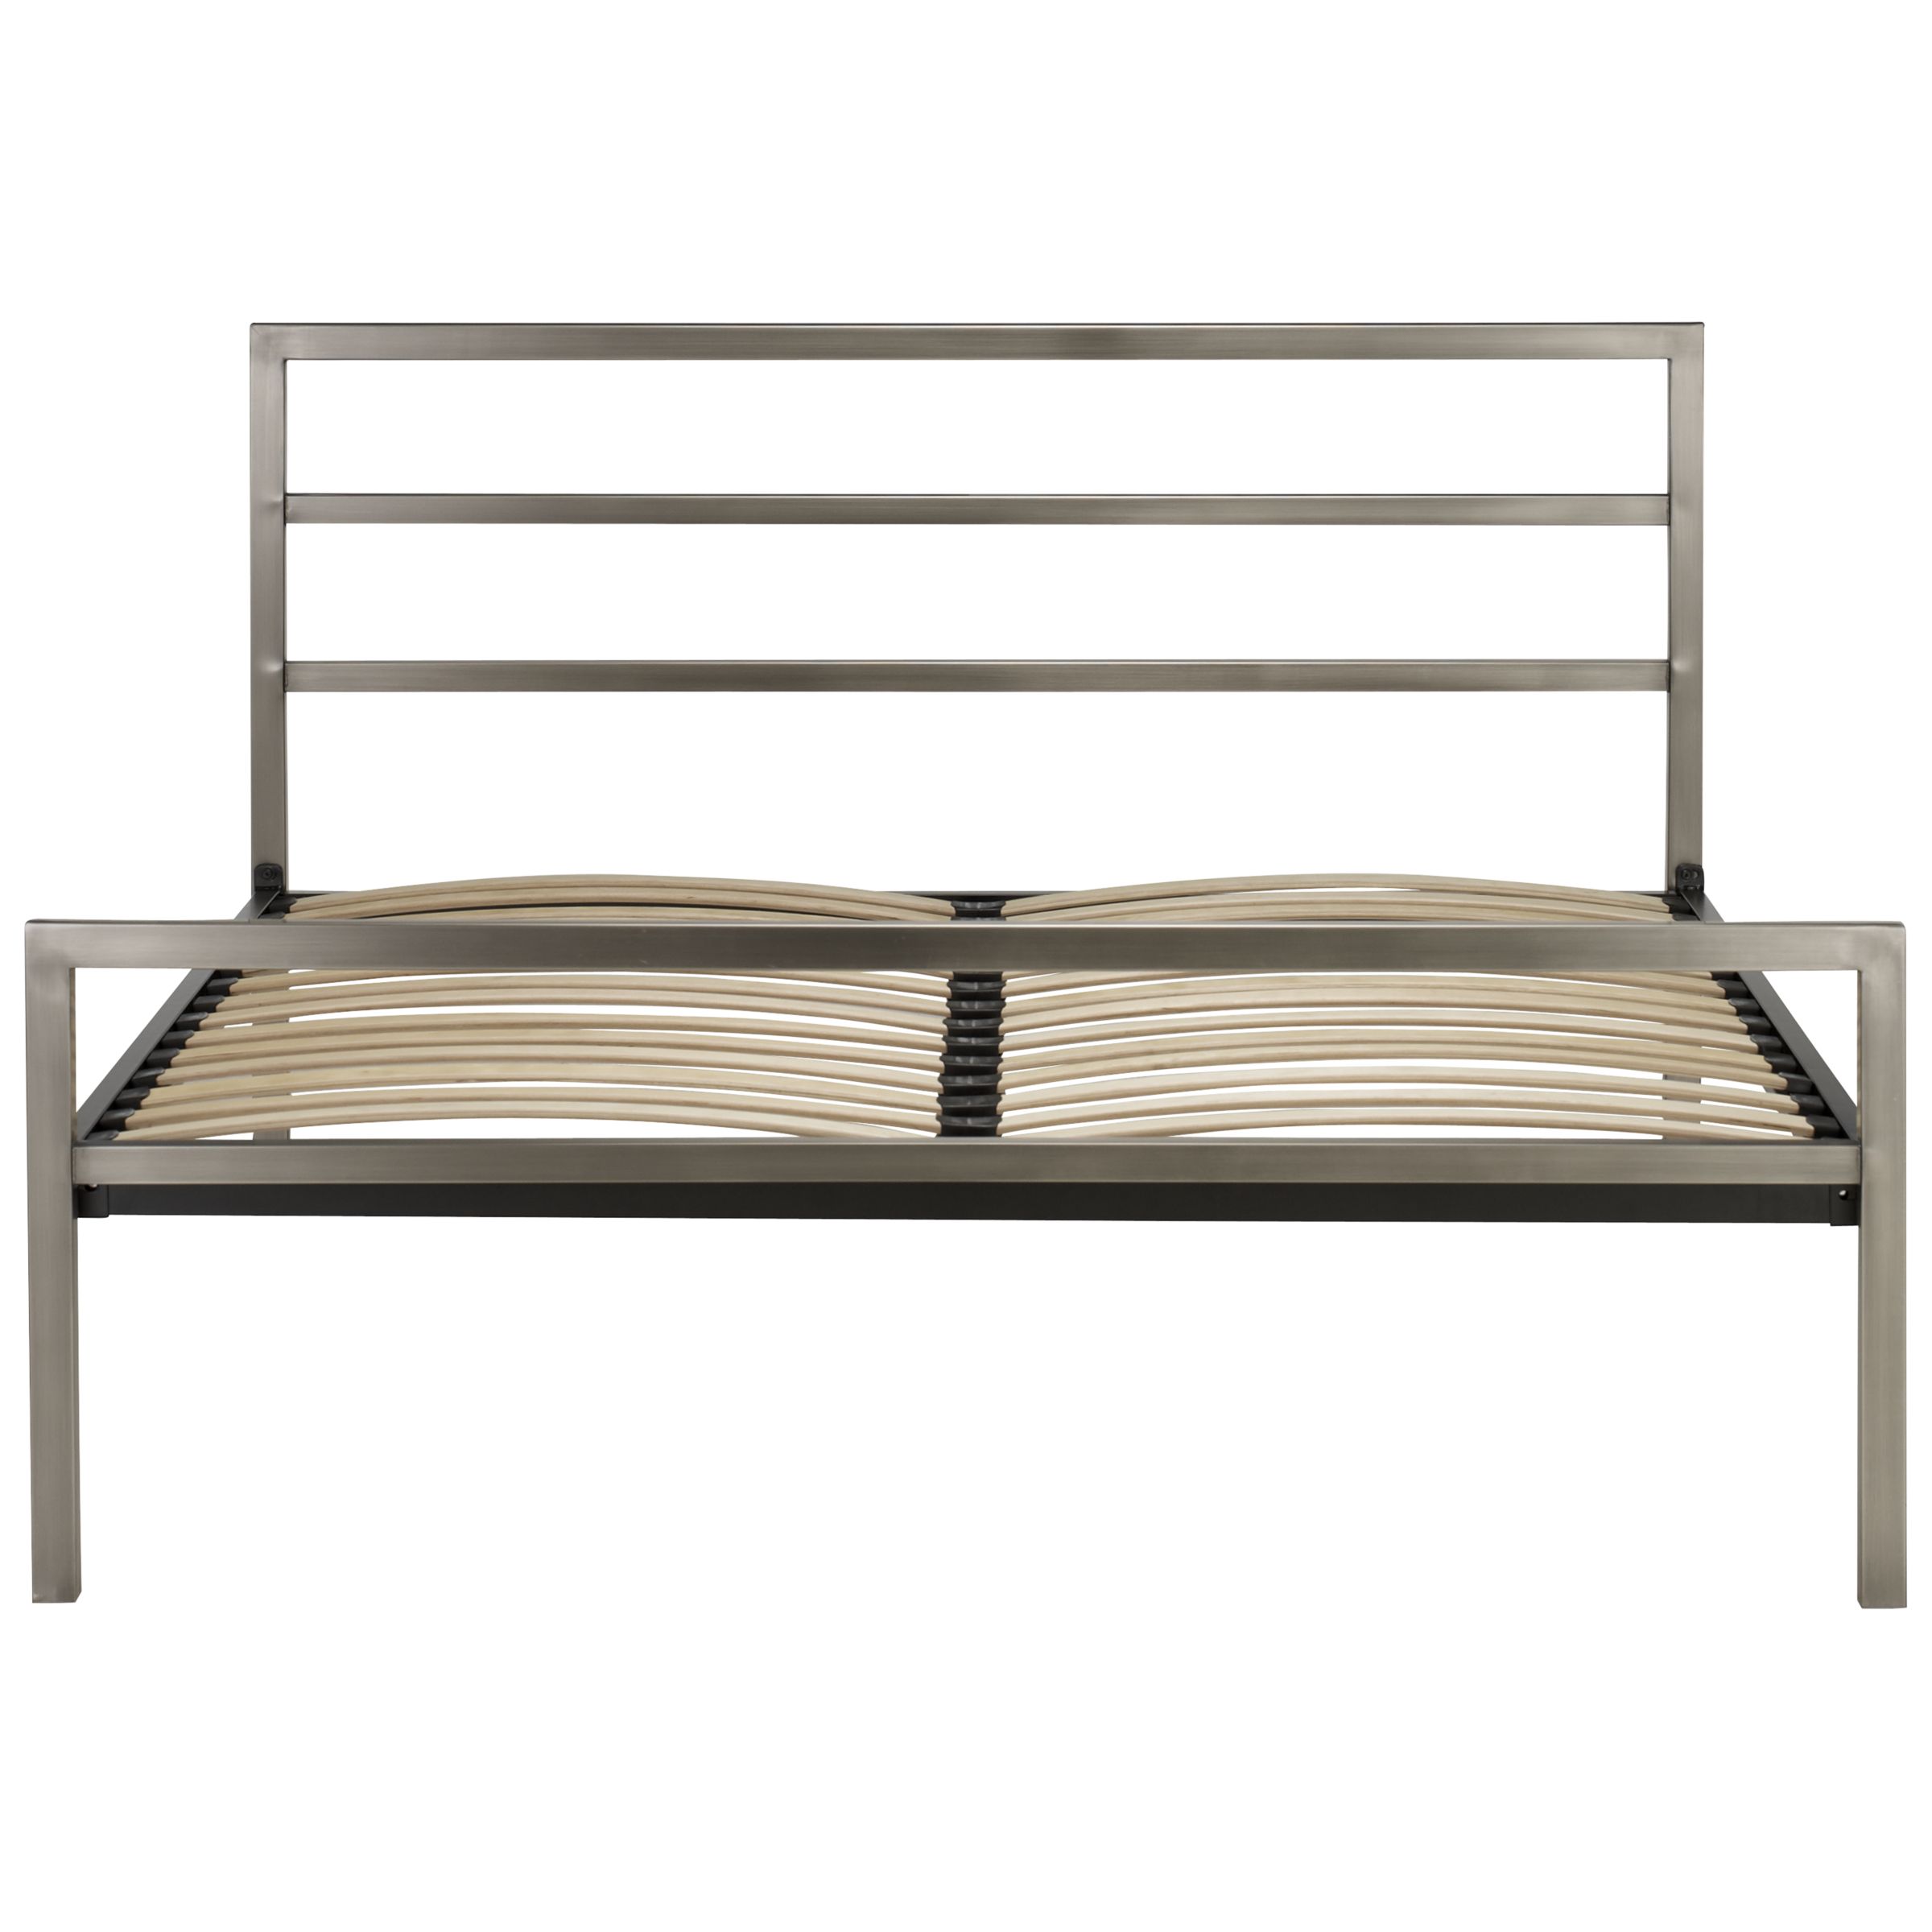 John Lewis Sherford Bedstead, Small Double